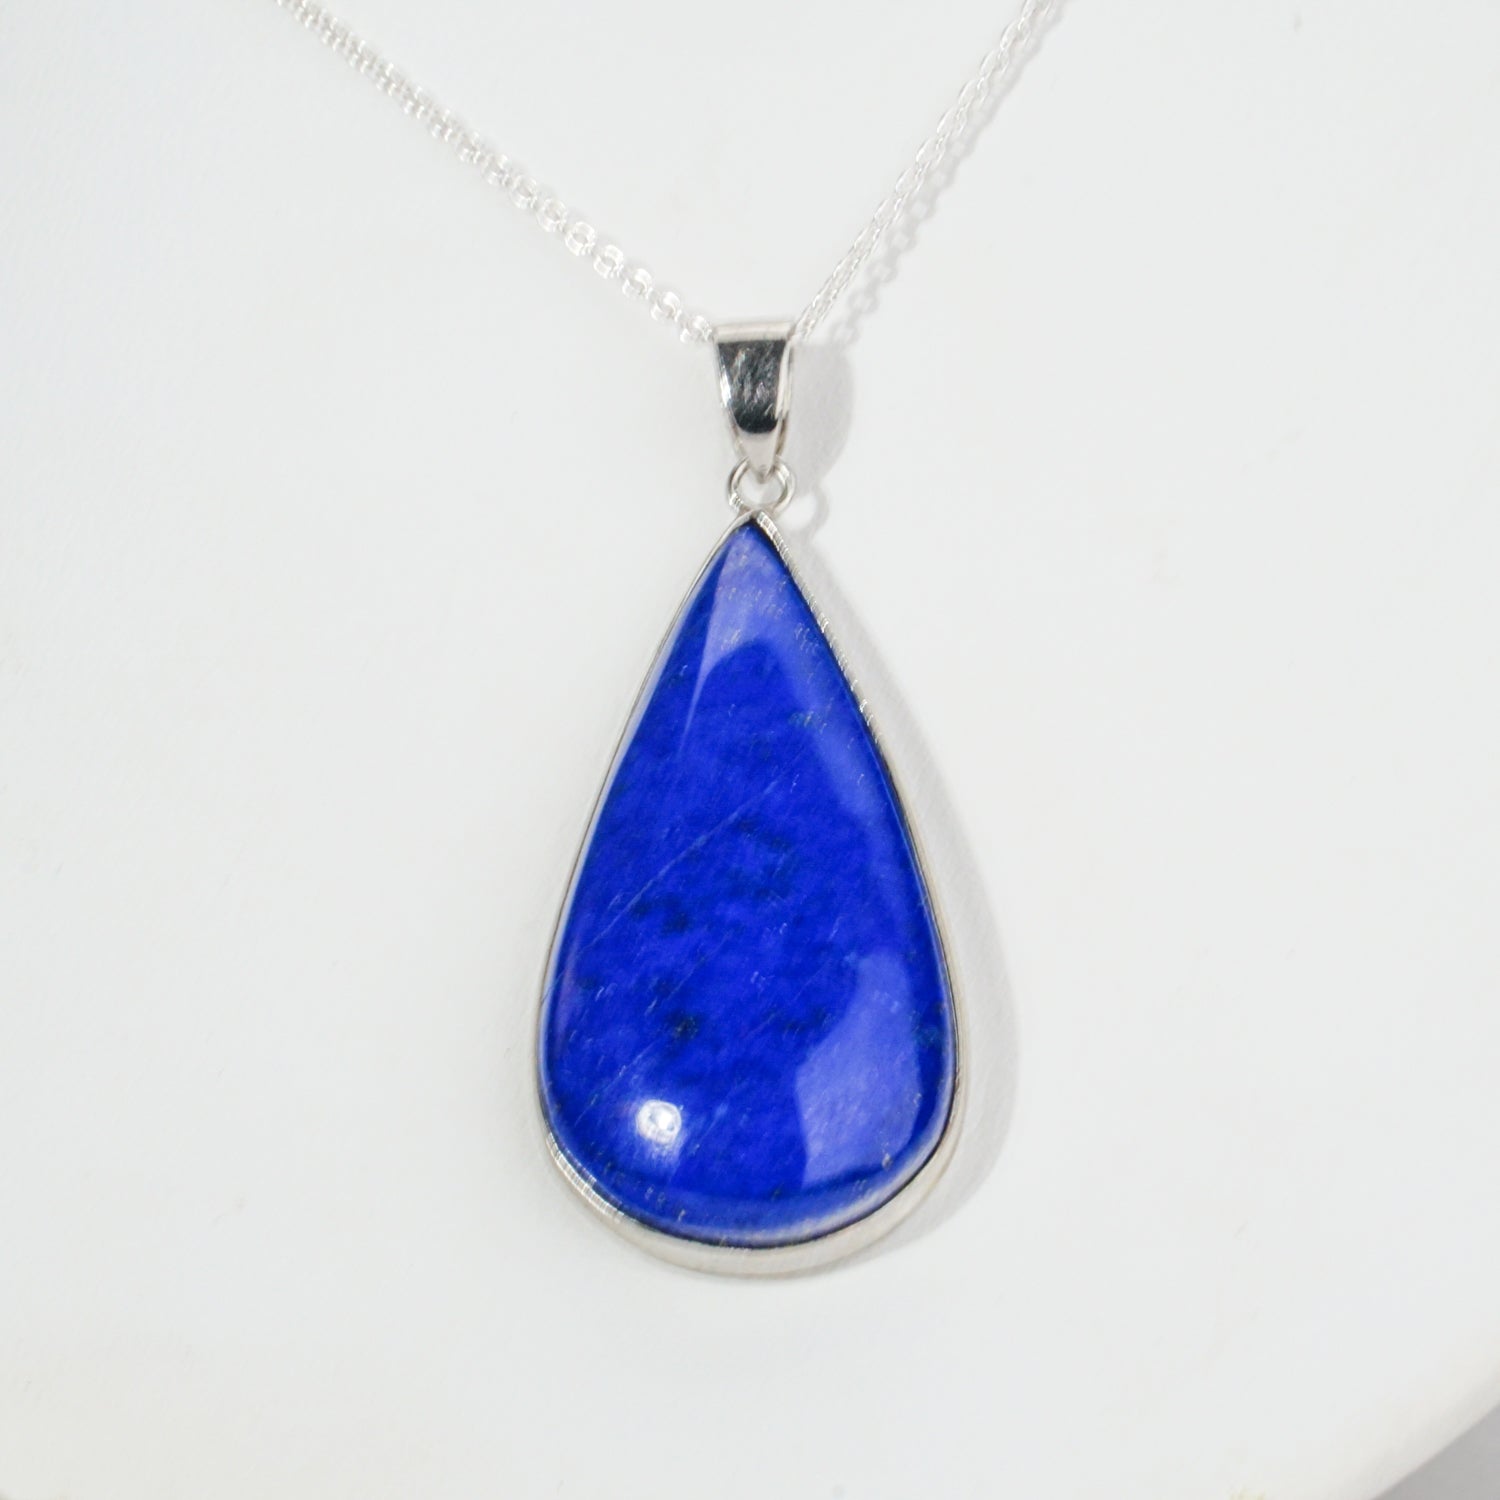 Genuine Lapis Lazuli Pendant with 18" Sterling Silver Chain